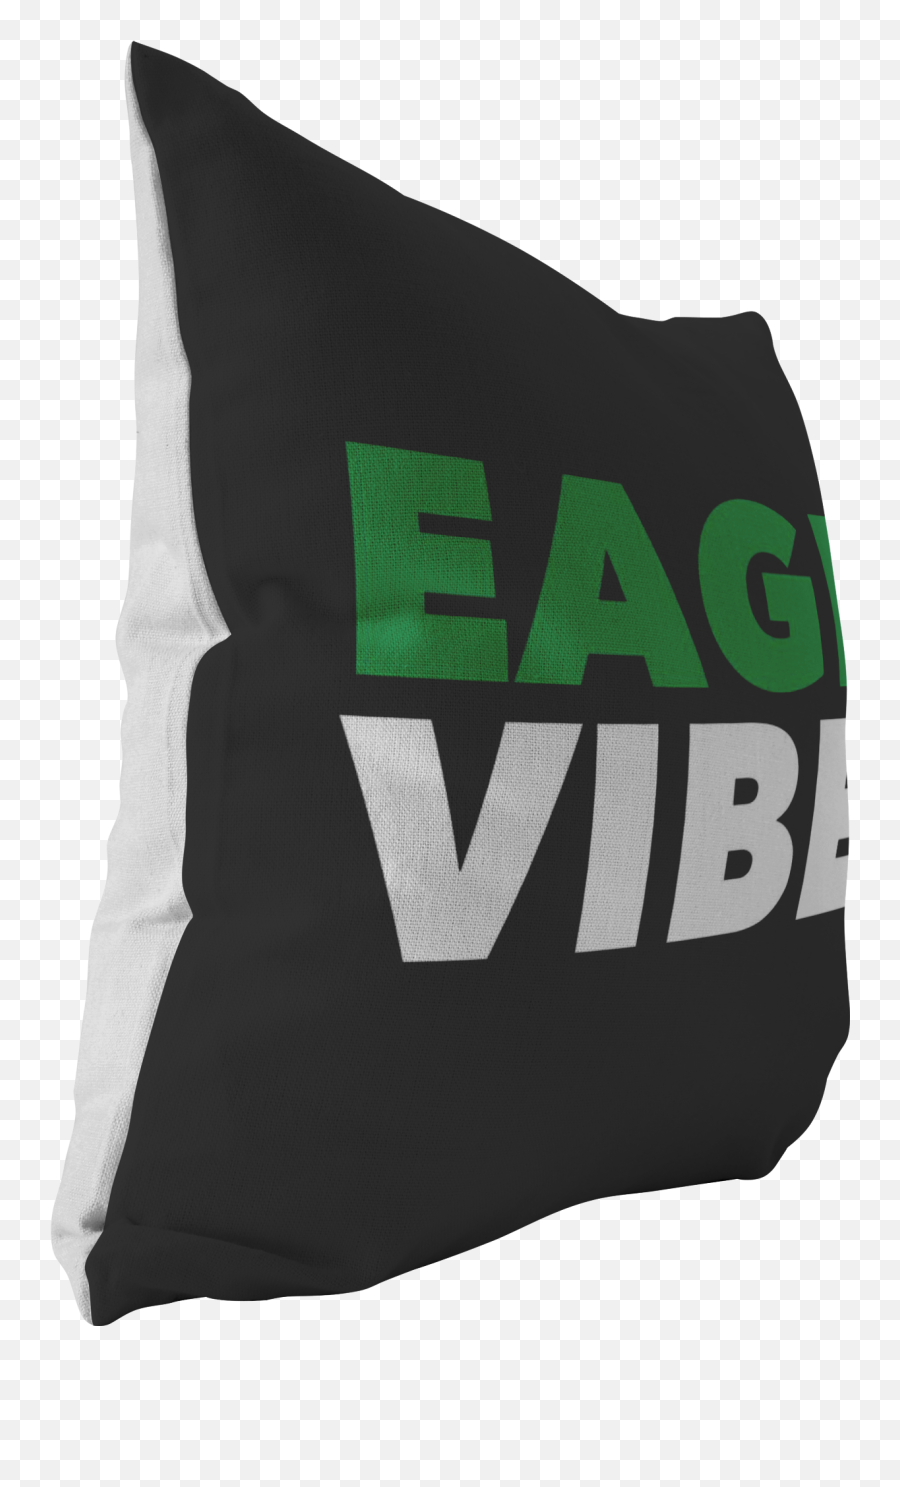 Eagle Vibes Pillow - Generation T Solid Emoji,Pictures Of Emoji Pillows